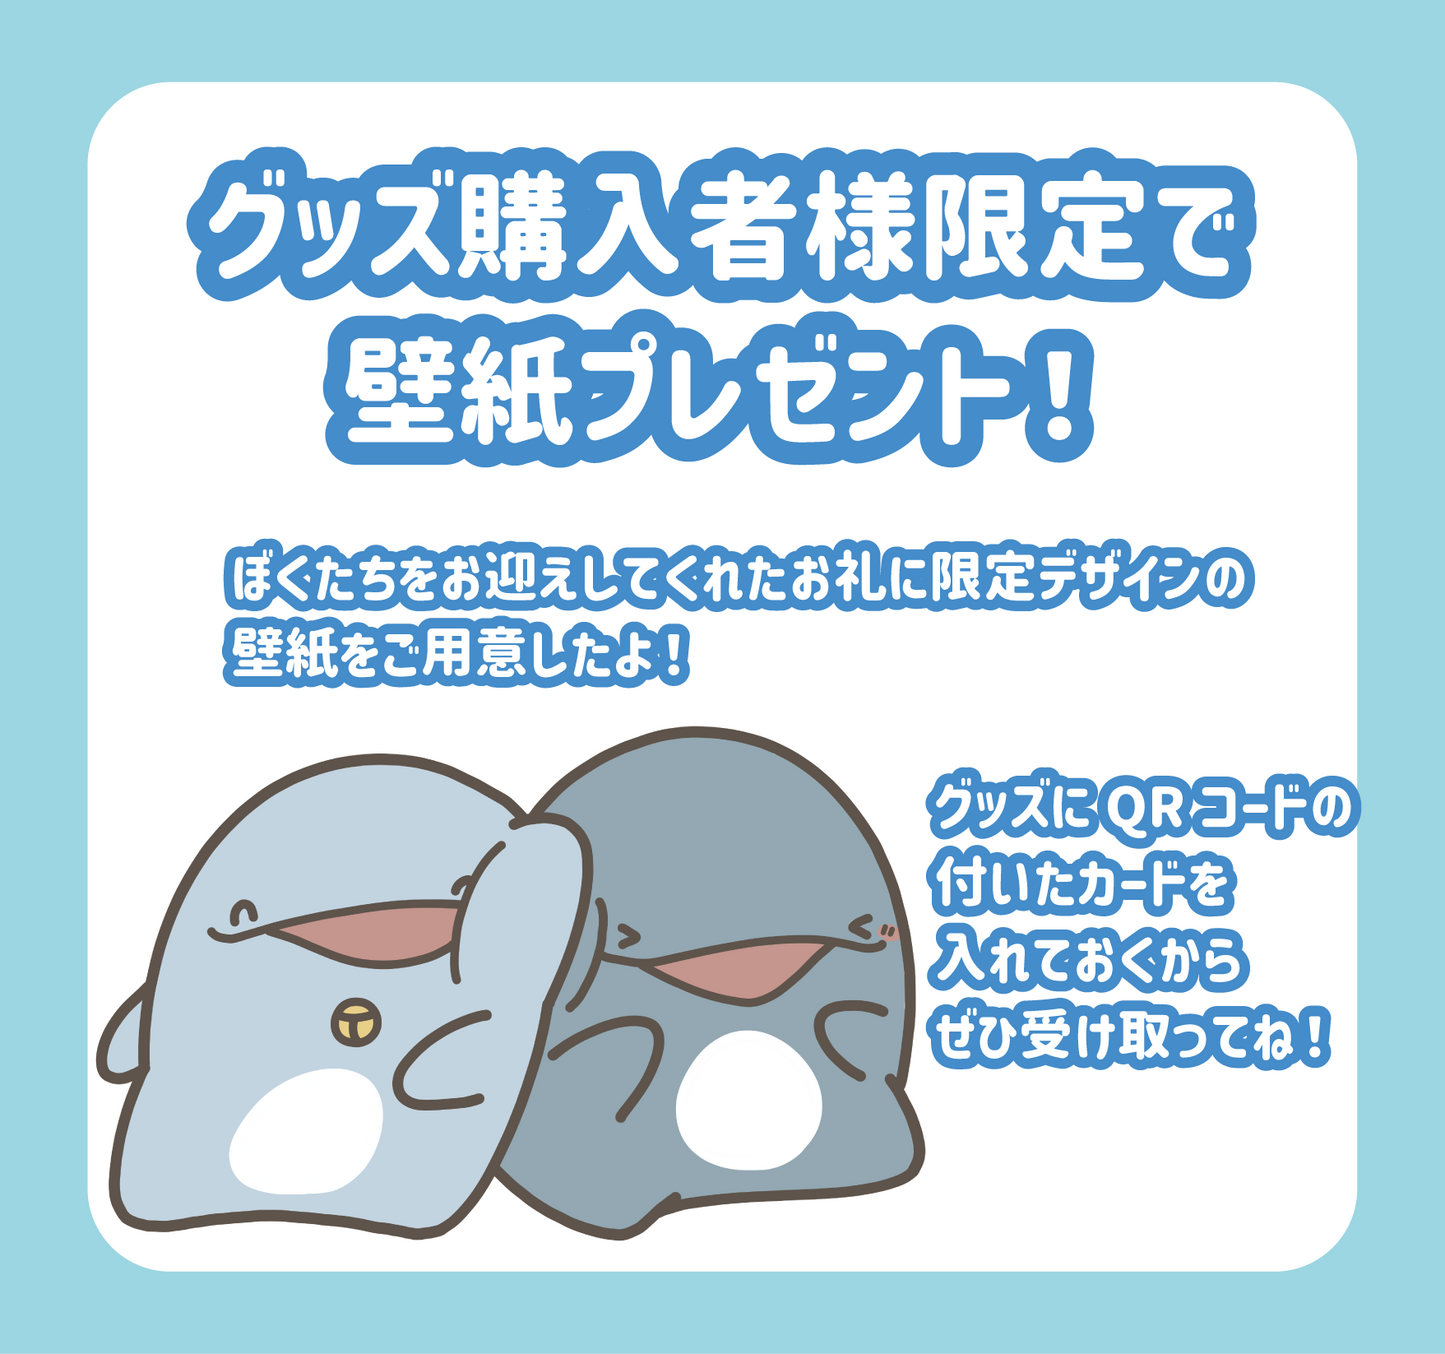 [Parent and child dolphin] Mini tote bag (son seven changes) [shipped in early May]